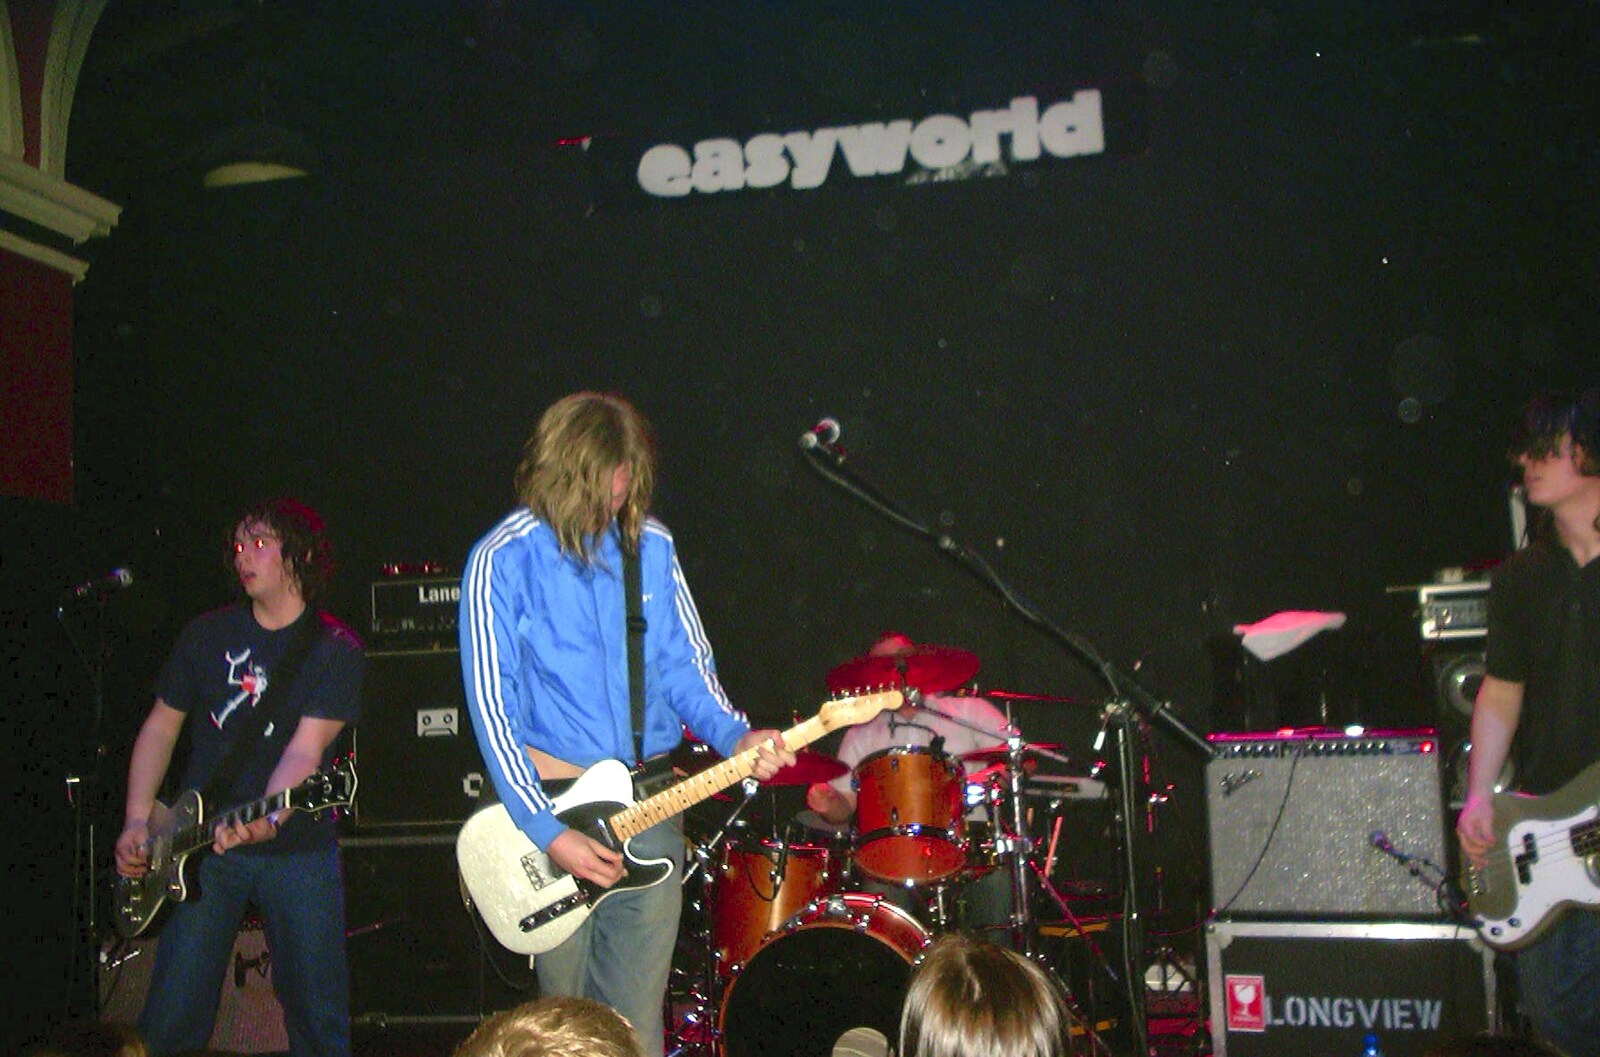 Longview on stage at the Arts Centre from Longview, Easyworld and Peterborough Cathedral, Cambridgeshire - 10th February 2003